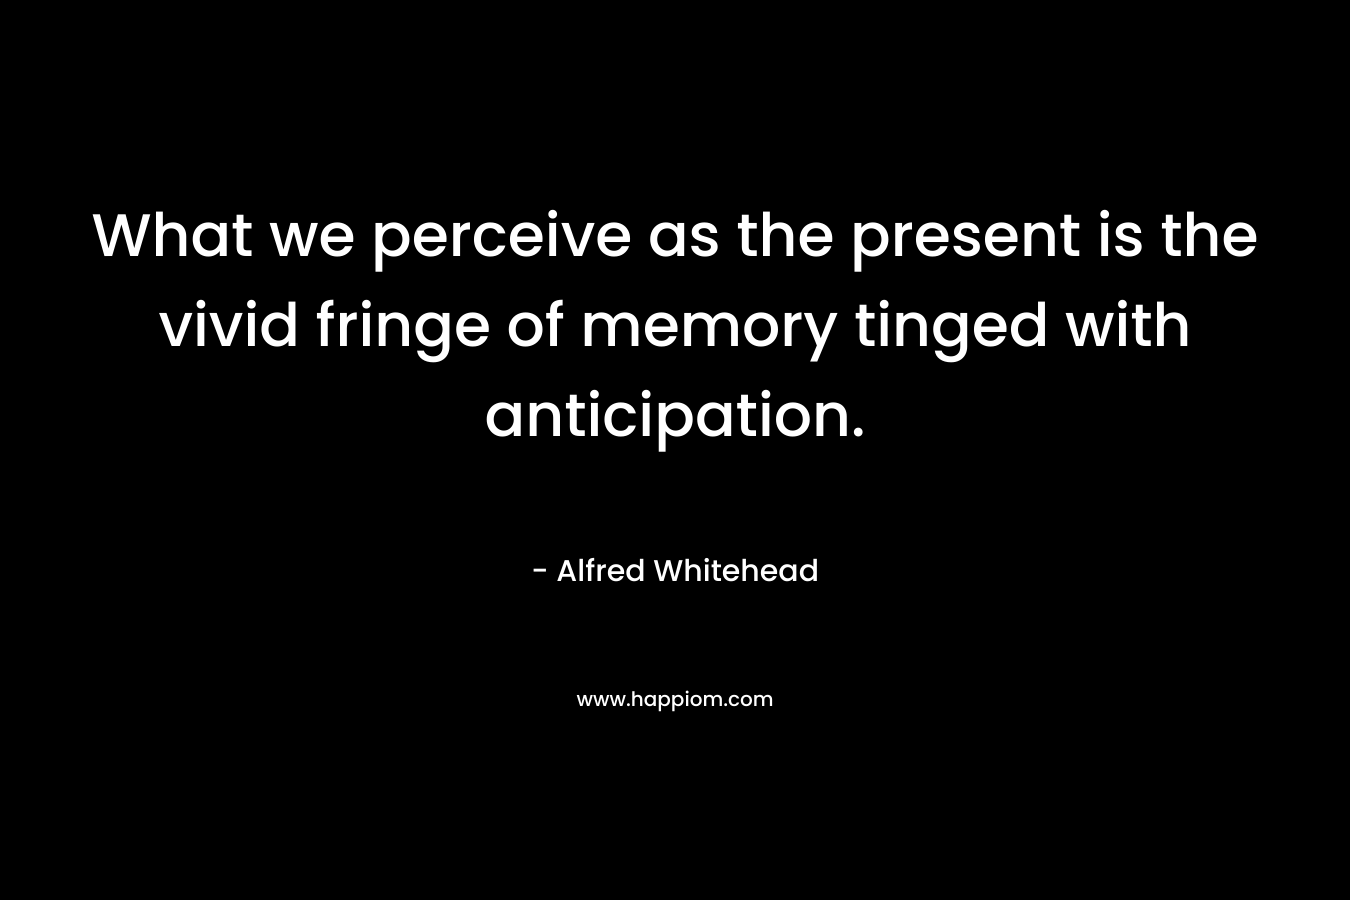 What we perceive as the present is the vivid fringe of memory tinged with anticipation.